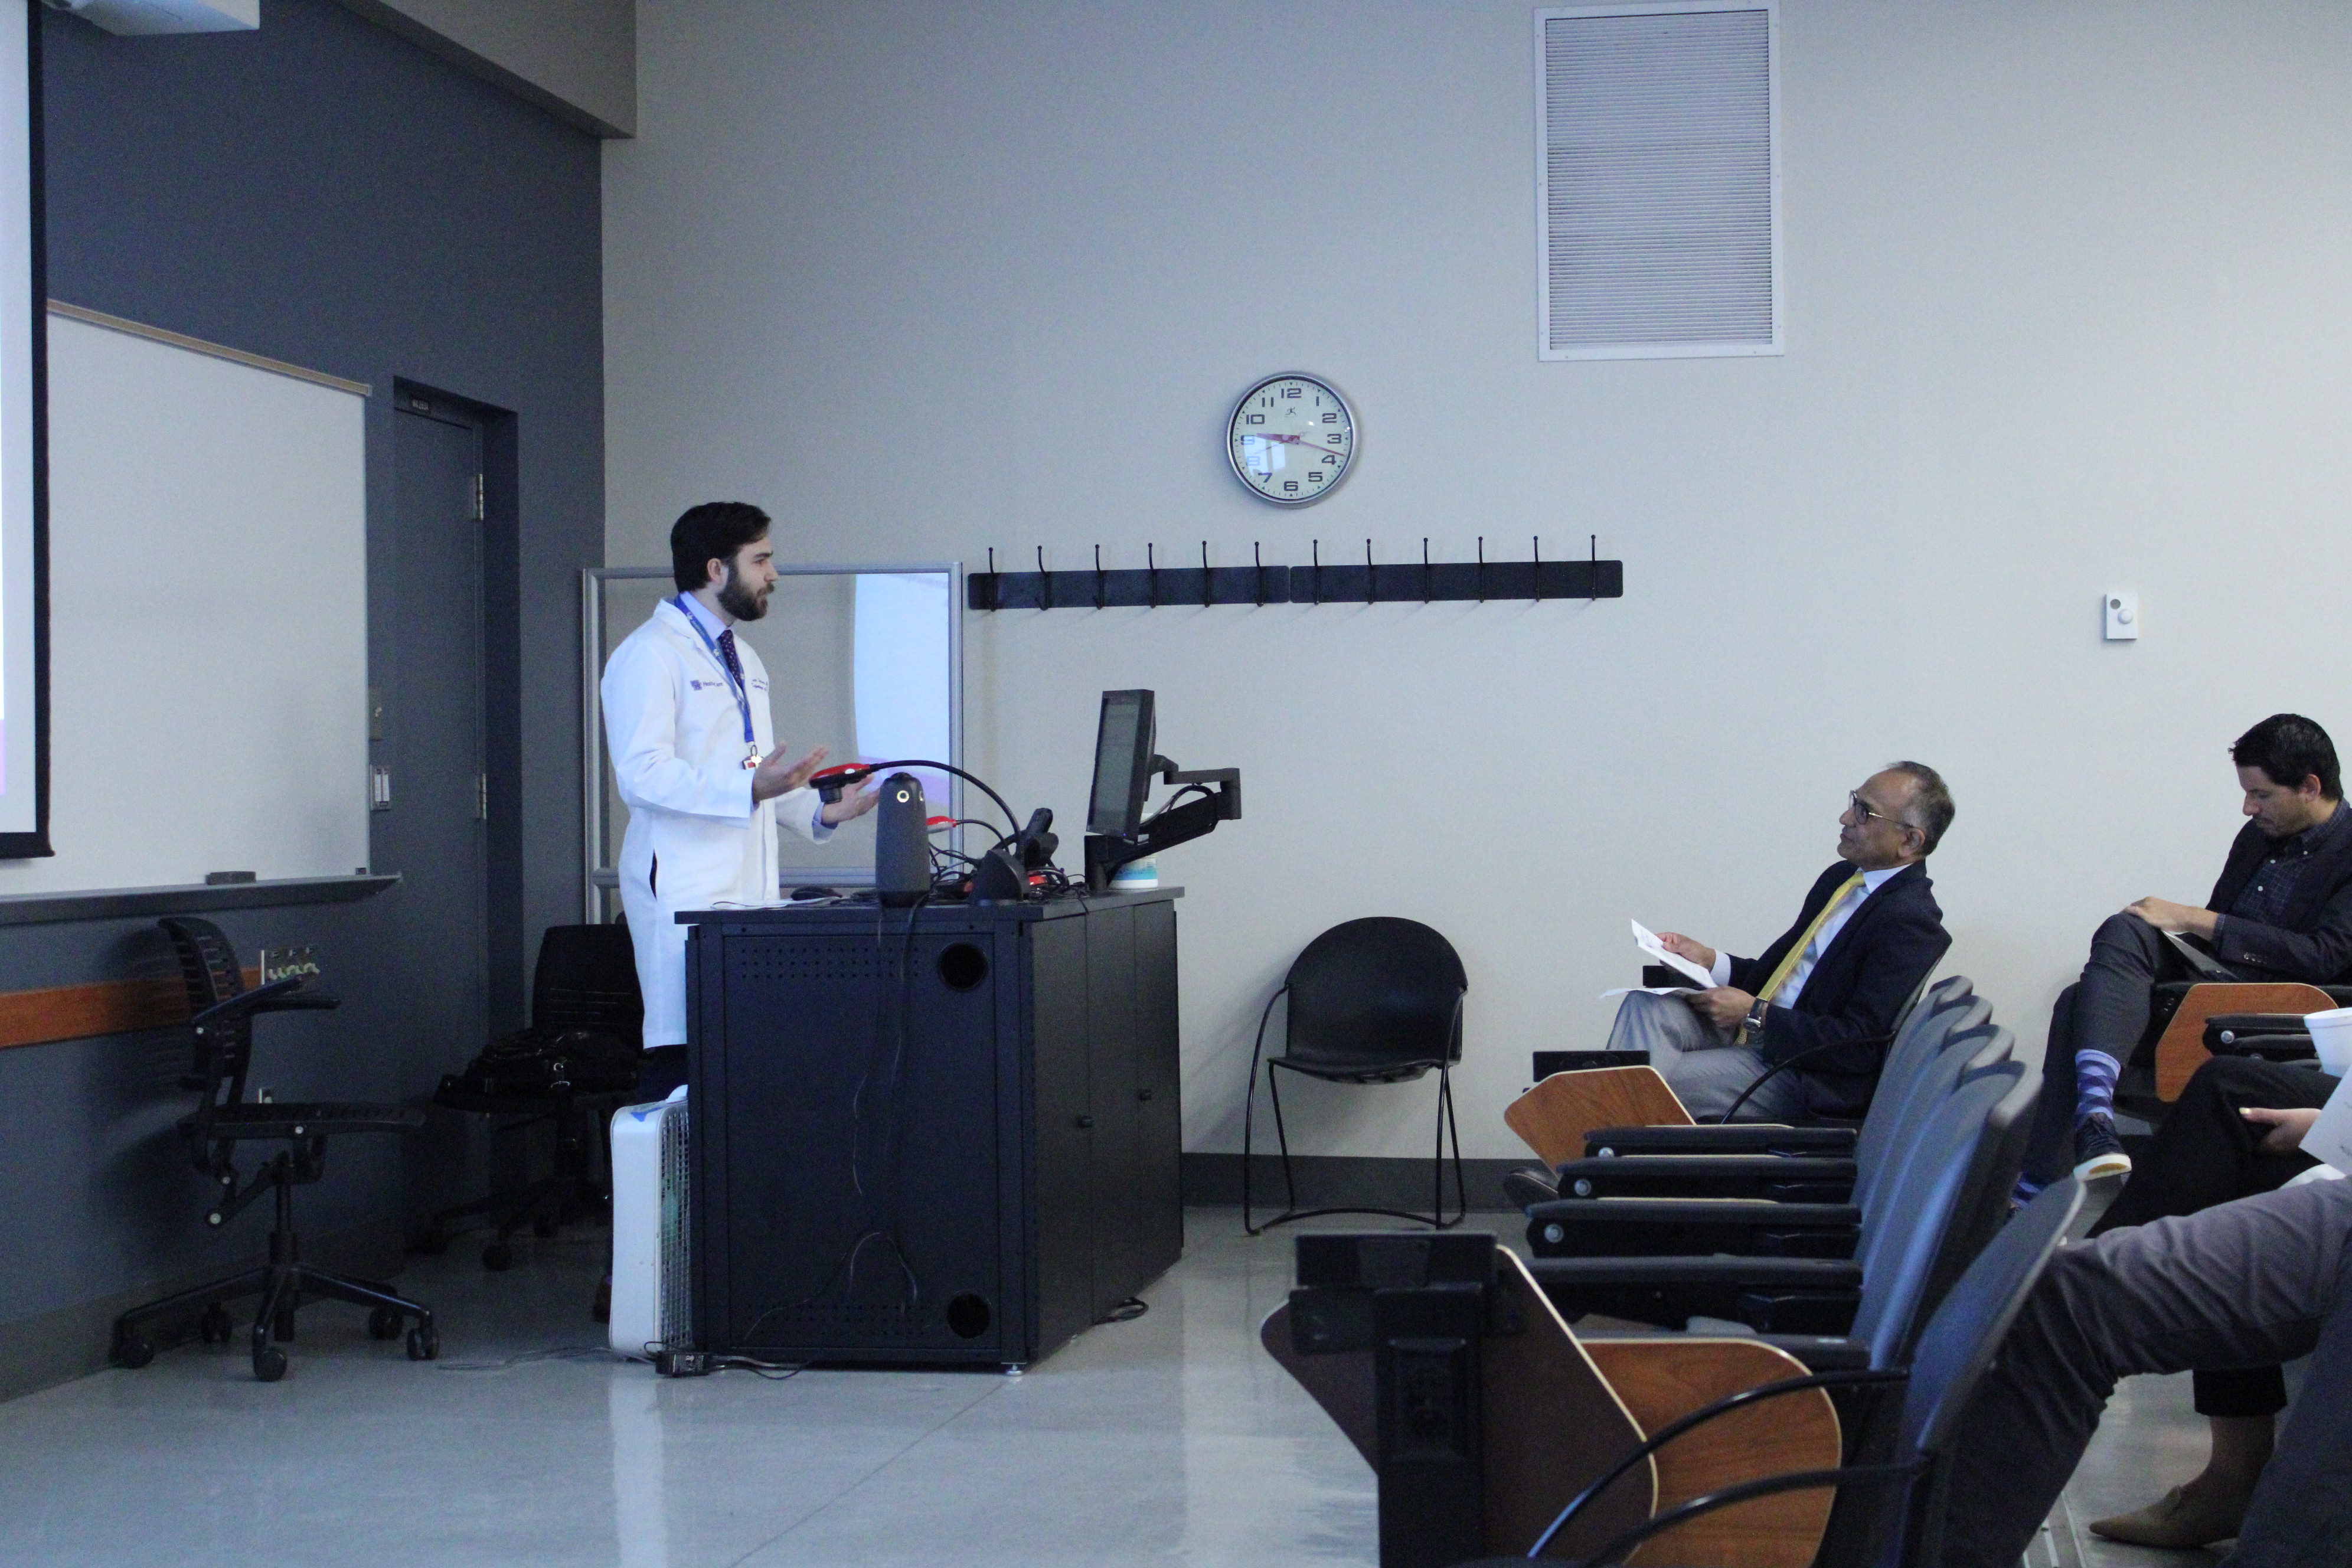 A UK student standing at a podium talking to Dr. Sundaram who is seated in an auditorium. 